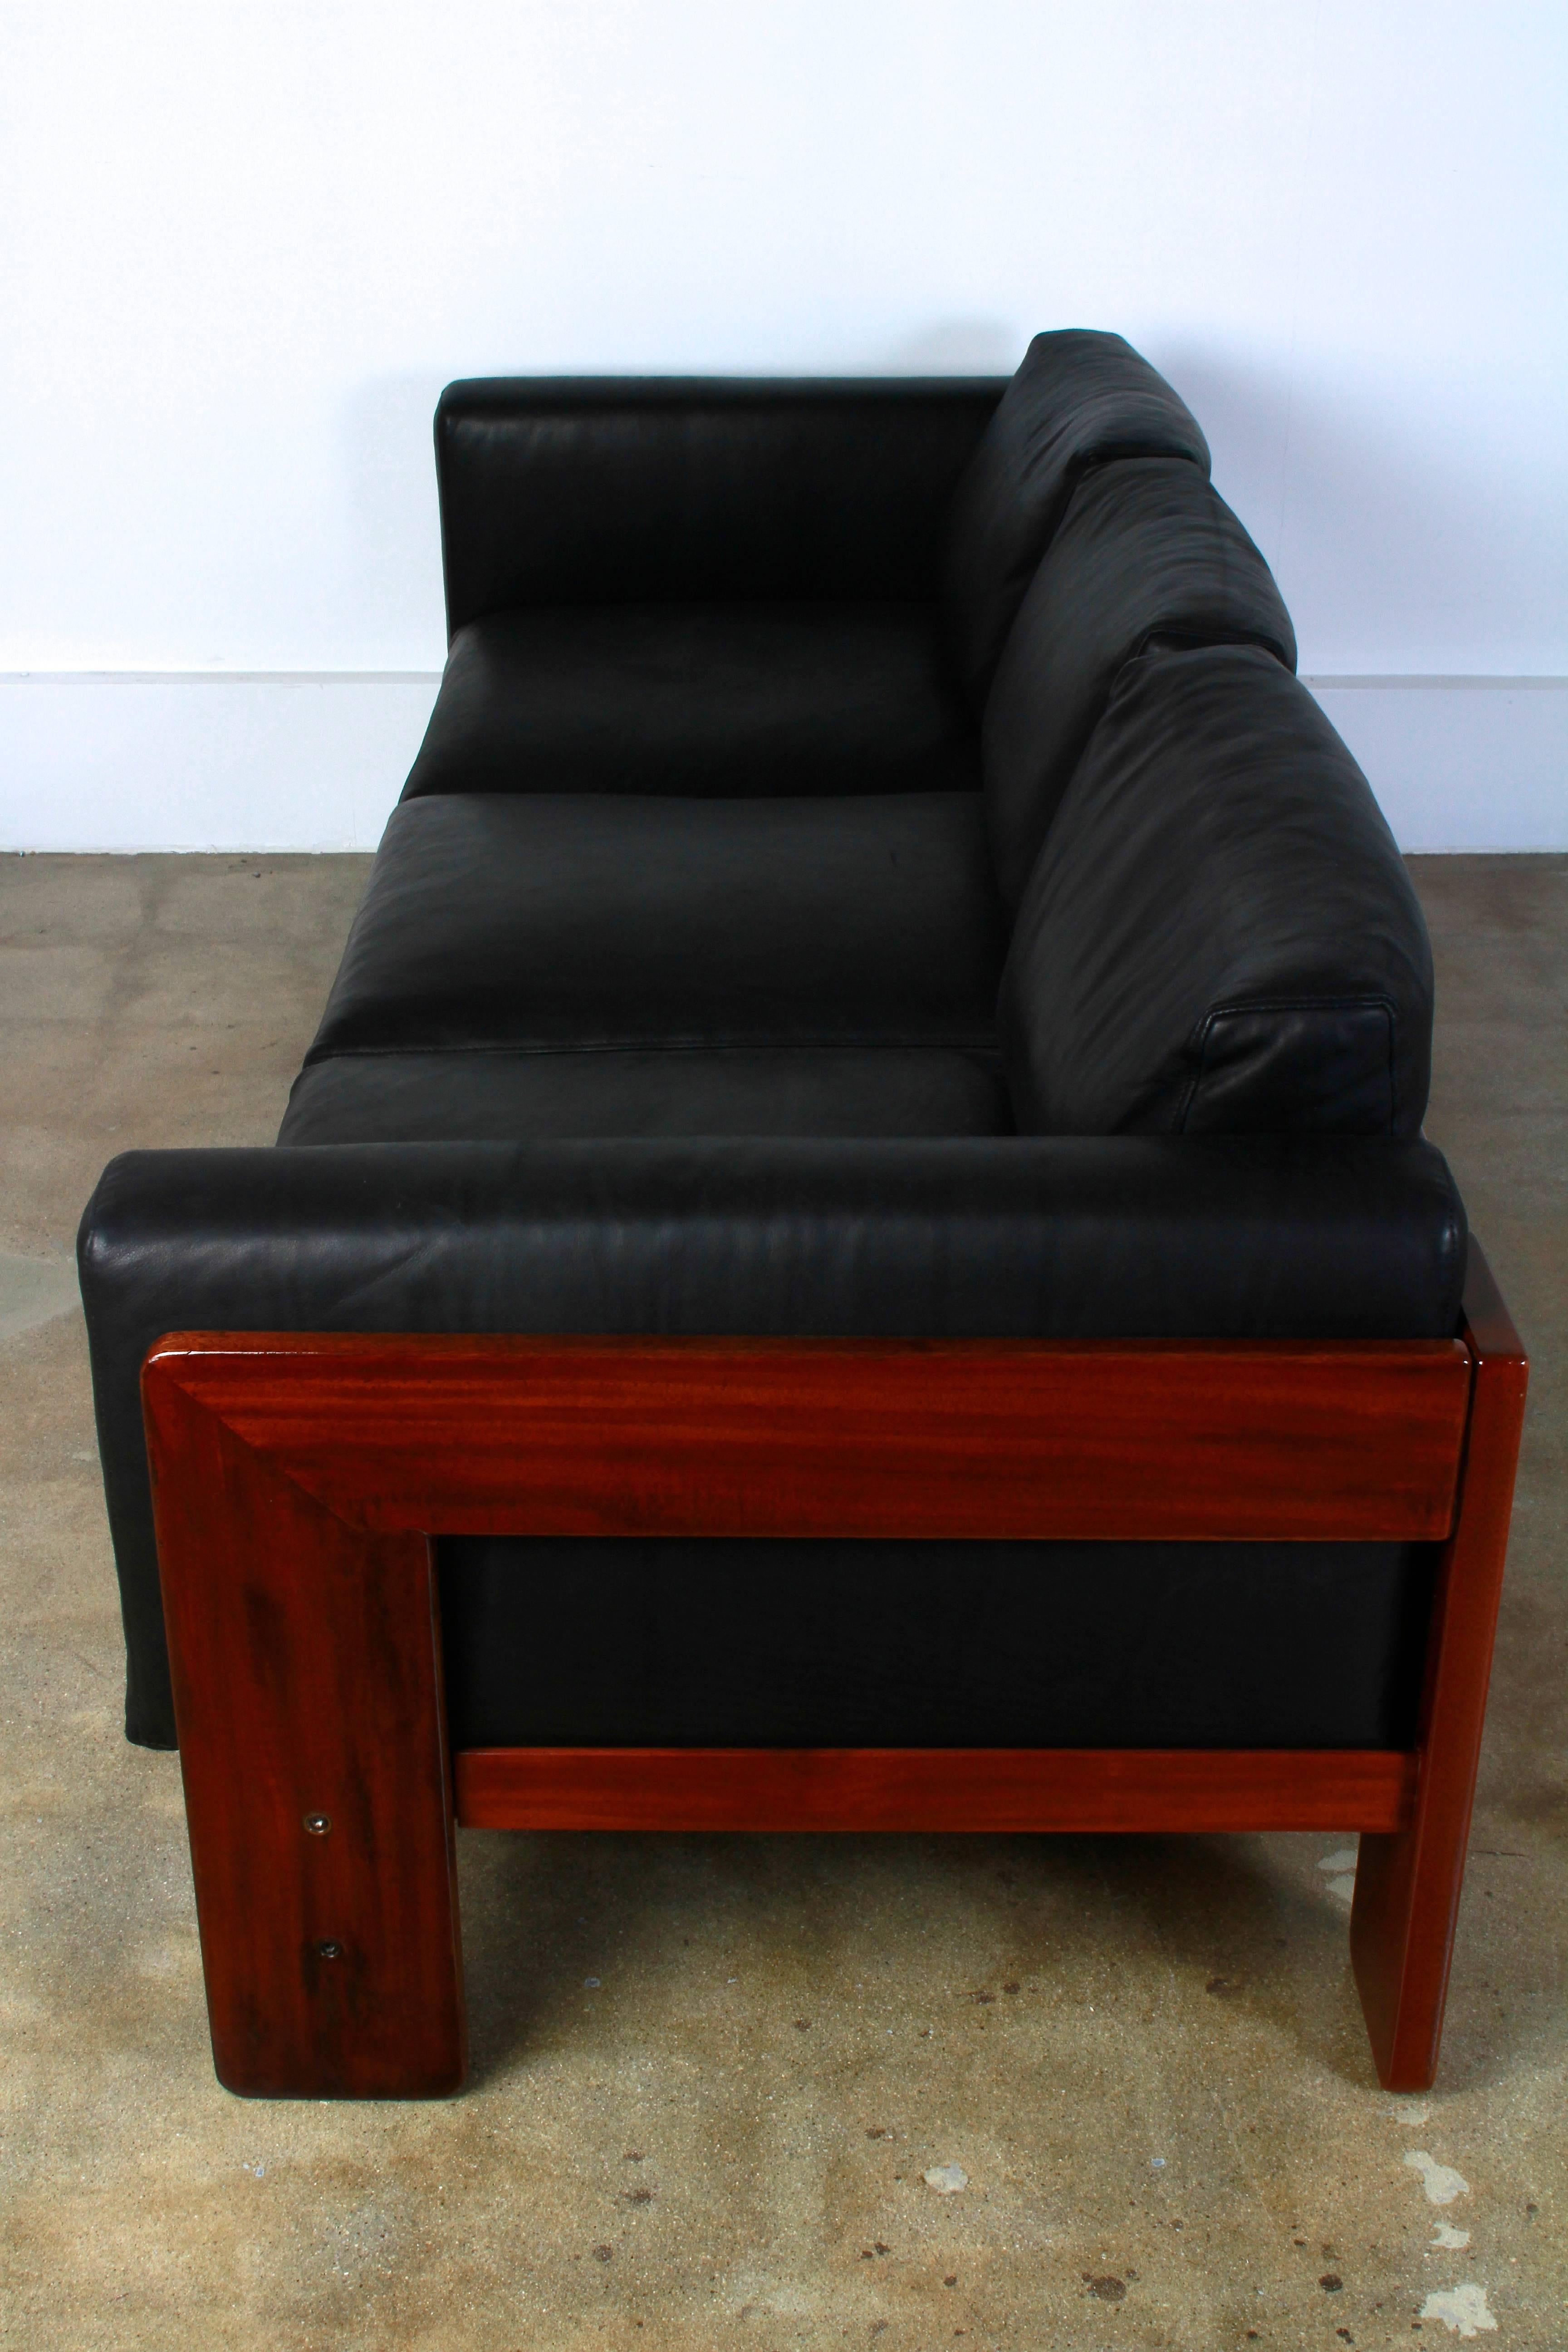 Tobia Scarpa "Bastiano" Mid-Century walnut sofa with down filled black Italian leather cushions.
Origin: Italy
Period: Mid-Century
Materials: Walnut, Italian leather
Condition: Excellent. Newly restored.
 